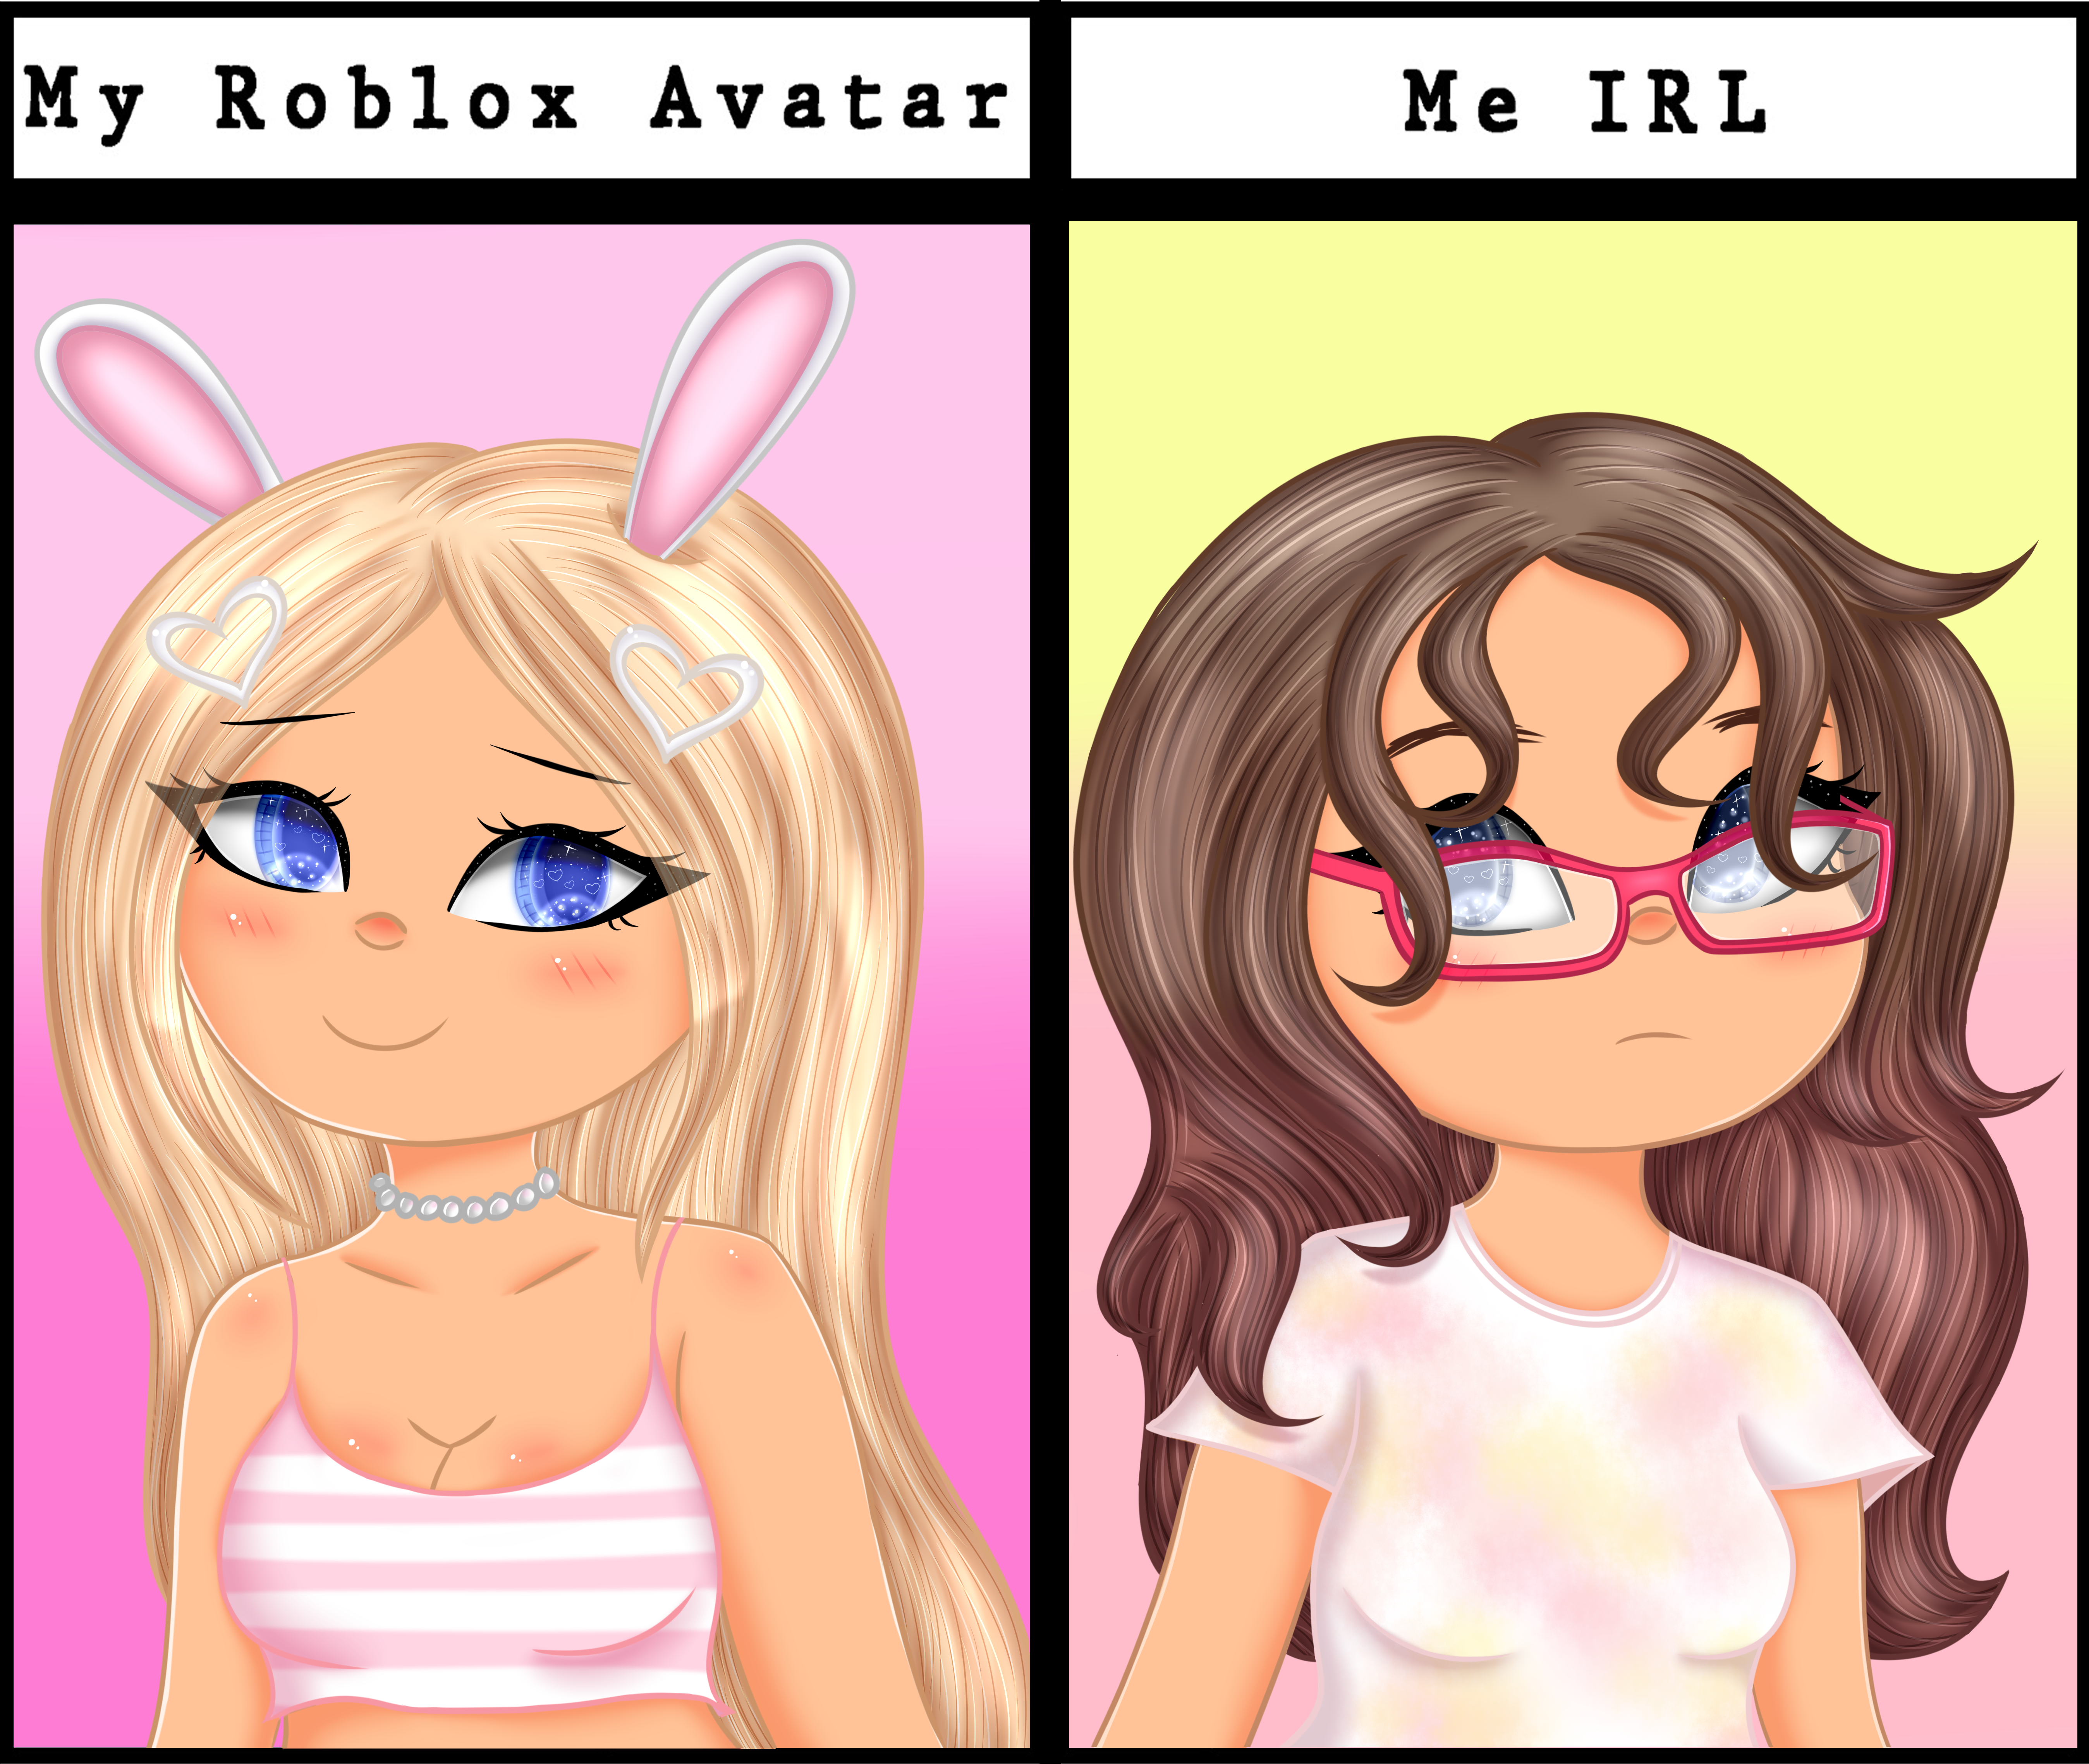 Roblox Avatar vs Real life me :) by cat-chai on DeviantArt